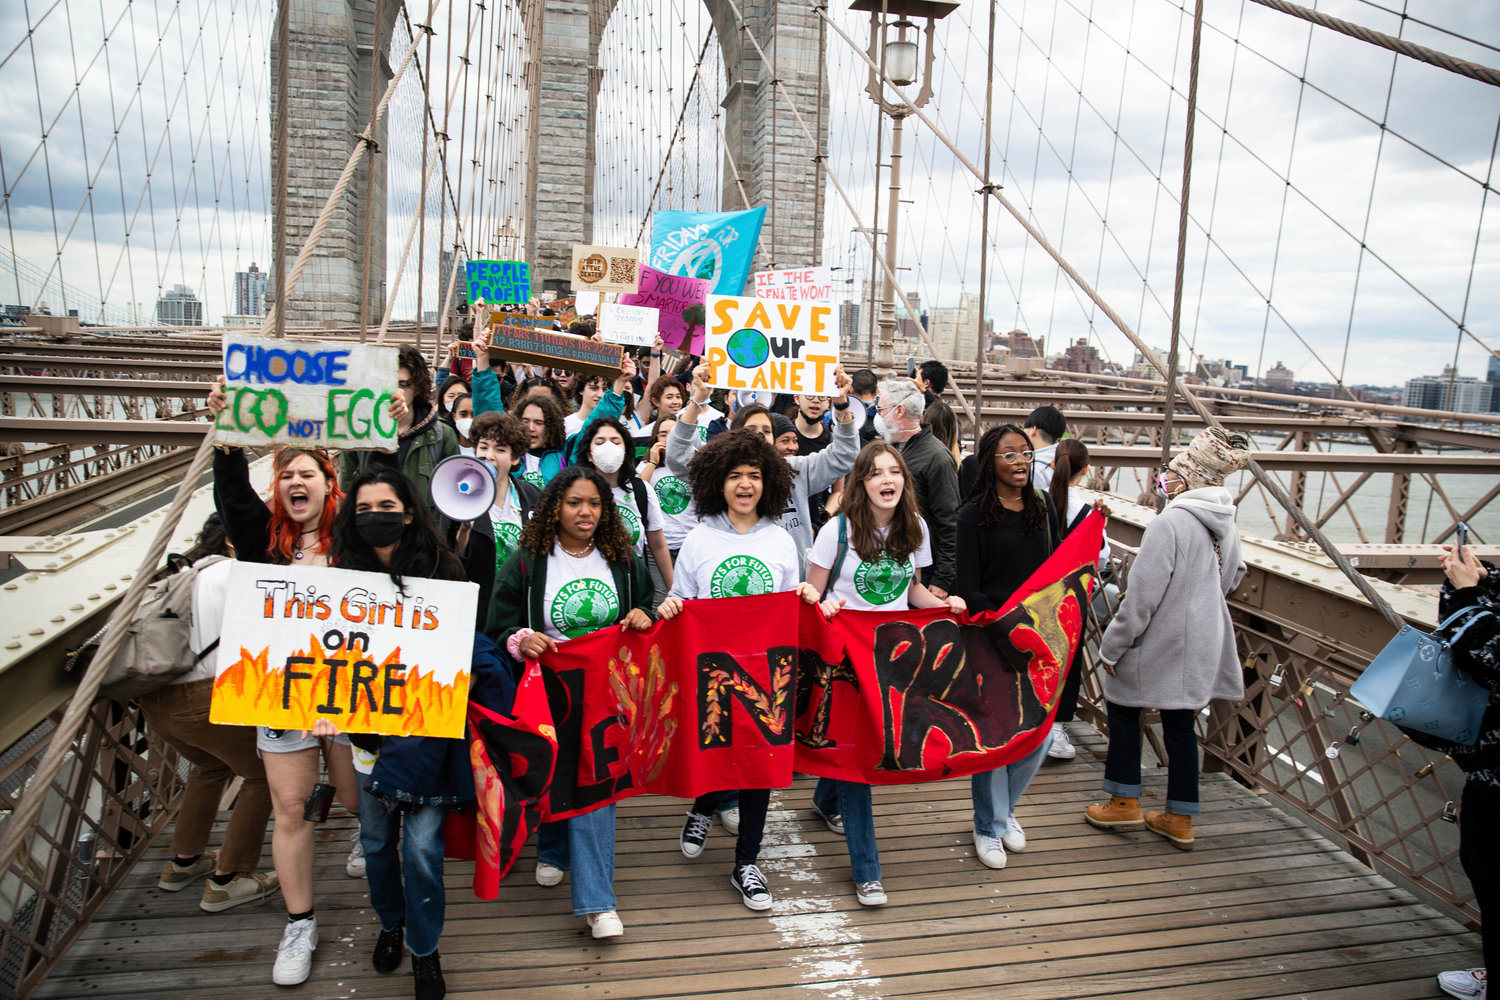 More than 1,000 young climate activists marched across the Brooklyn Bridge to Foley Square as part of a global climate strike March 25. Our columnist offers a few suggestions for summertime learning that, he argues, are just as real-world consequential as climate change.